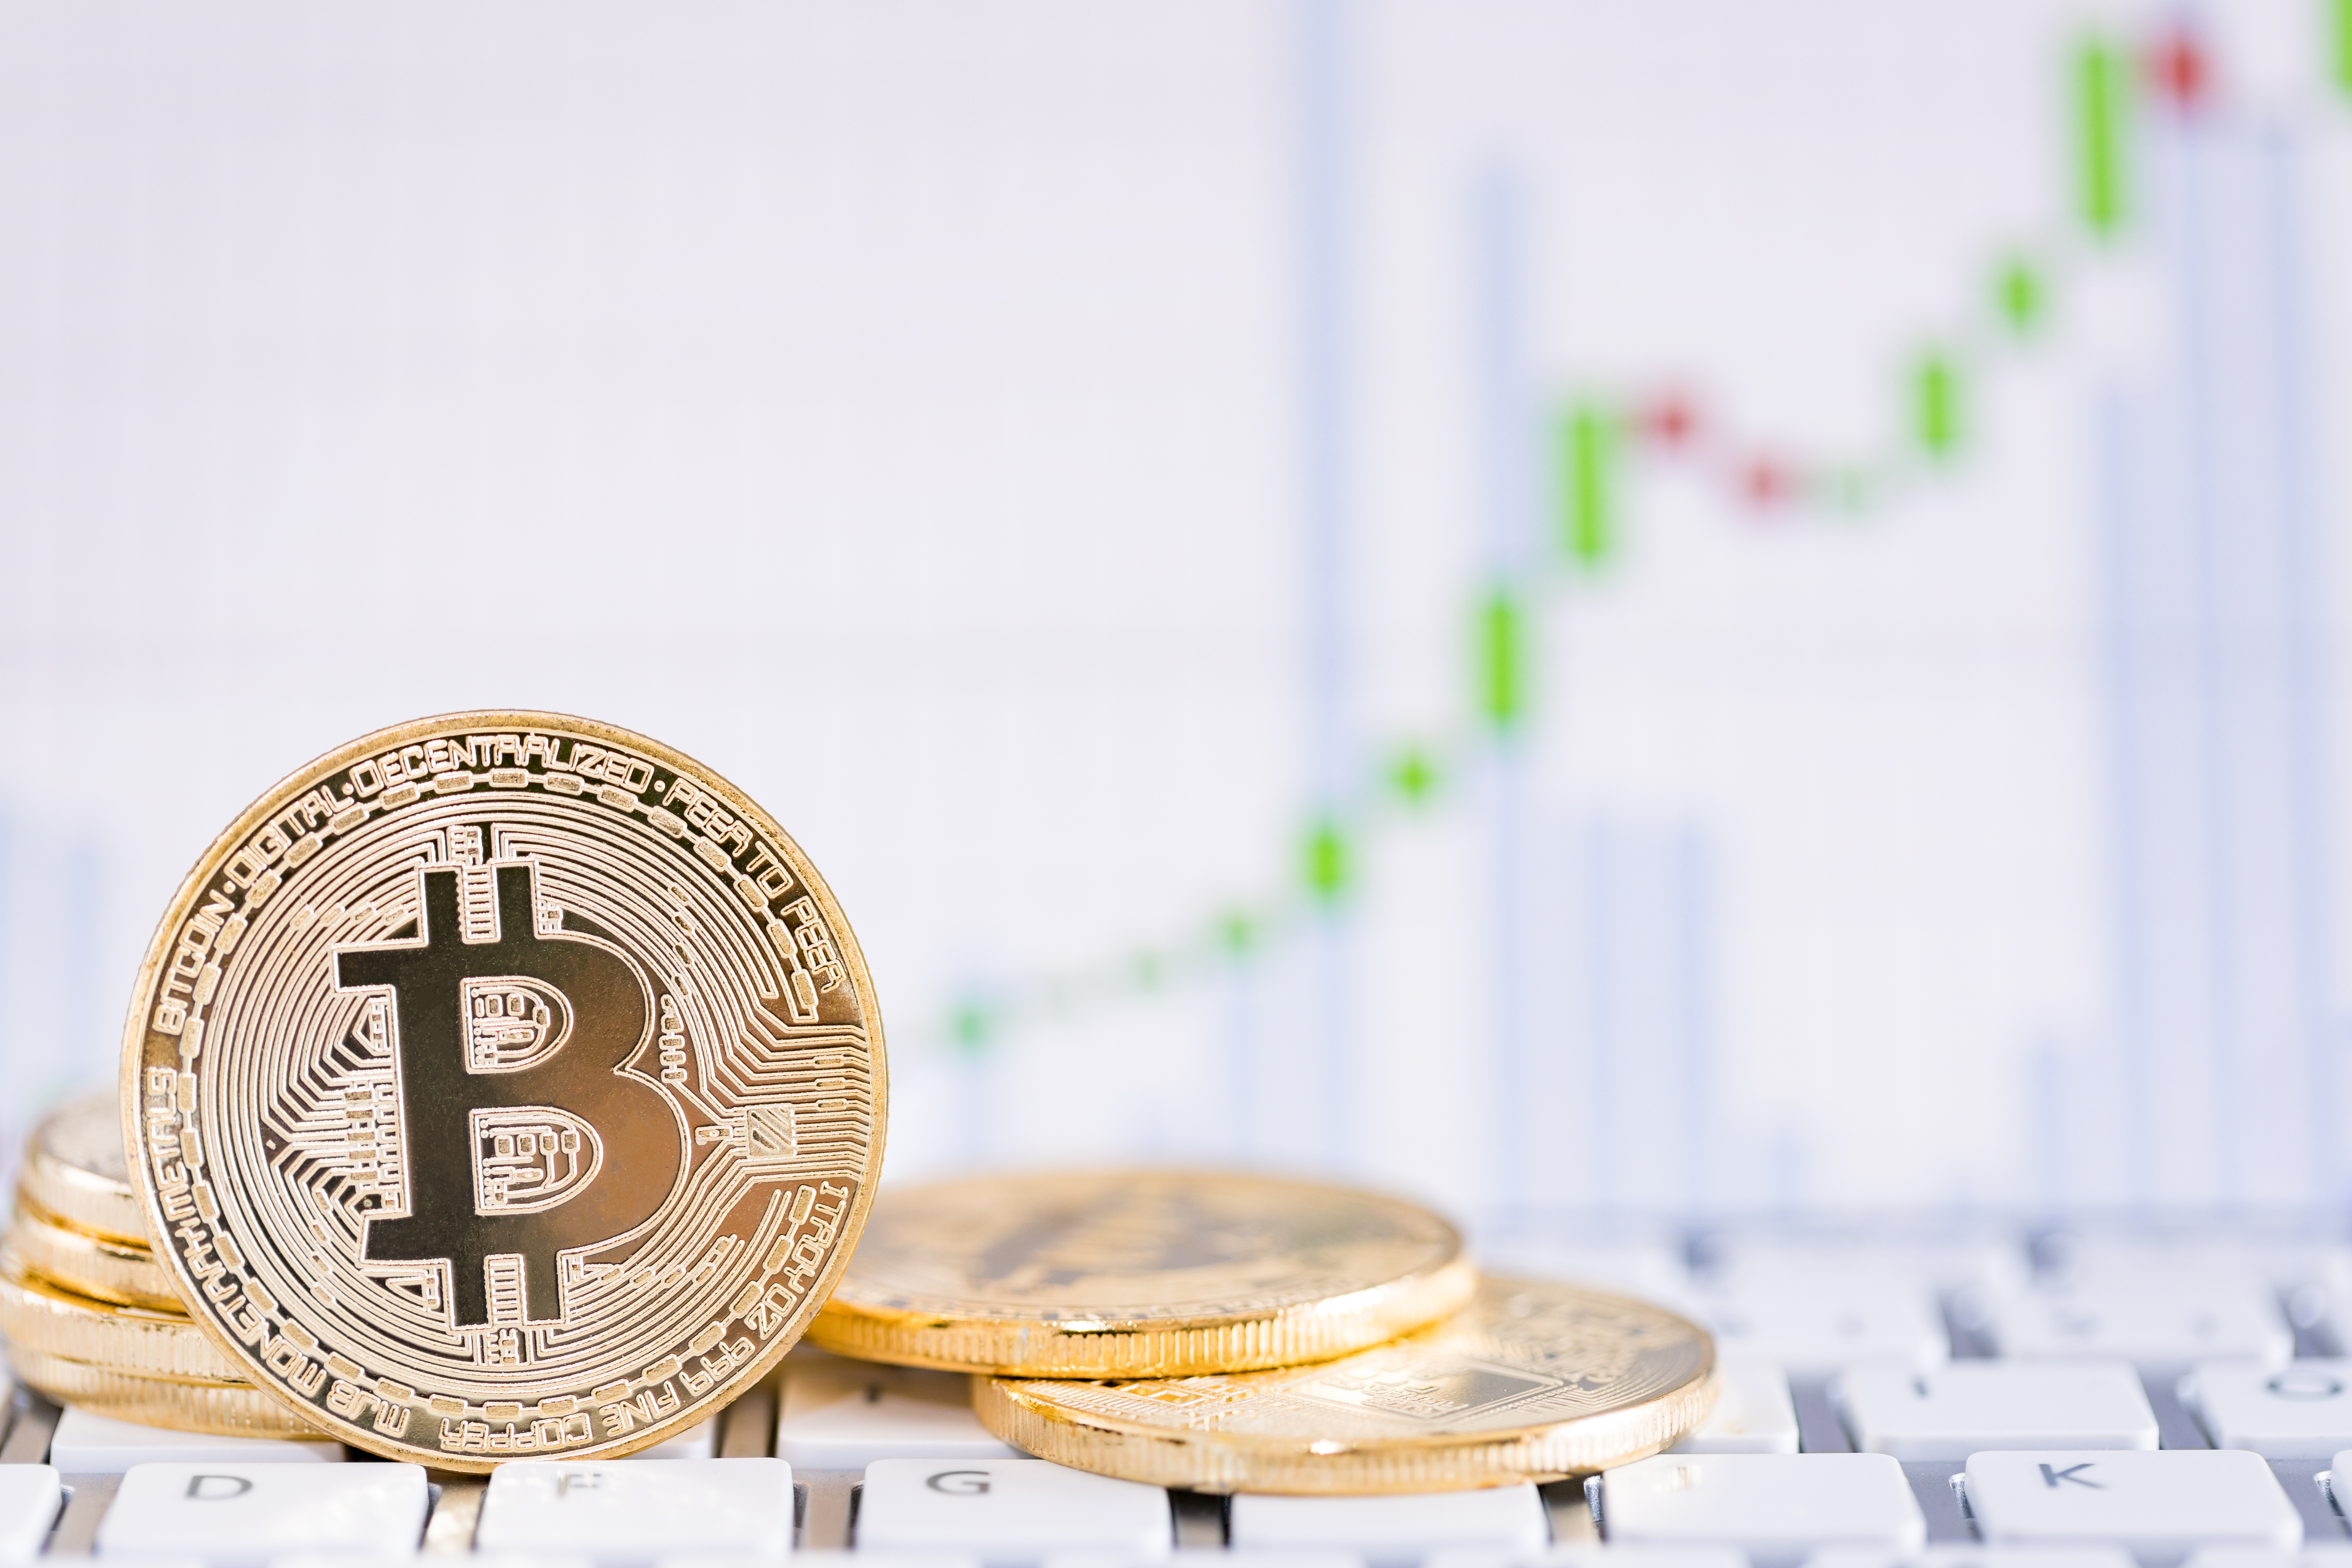 Bitcoin Price to Benefit From Record High Open Interest as YTD Volatility Weakens